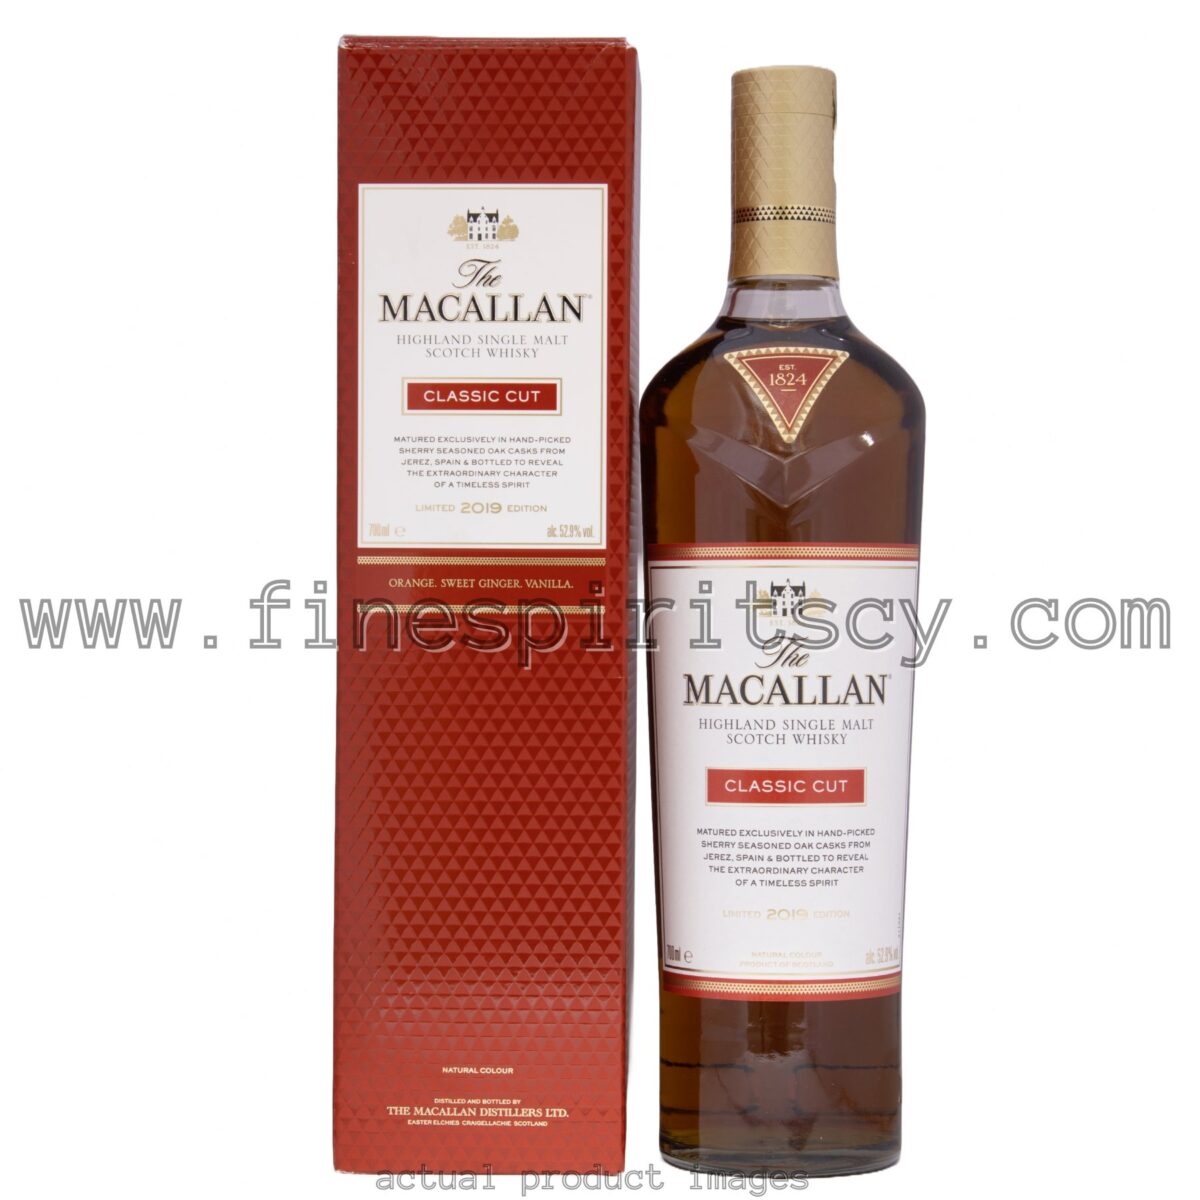 The Macallan Classic Cut Limited Edition Release 2019 Price Cyprus FSCY